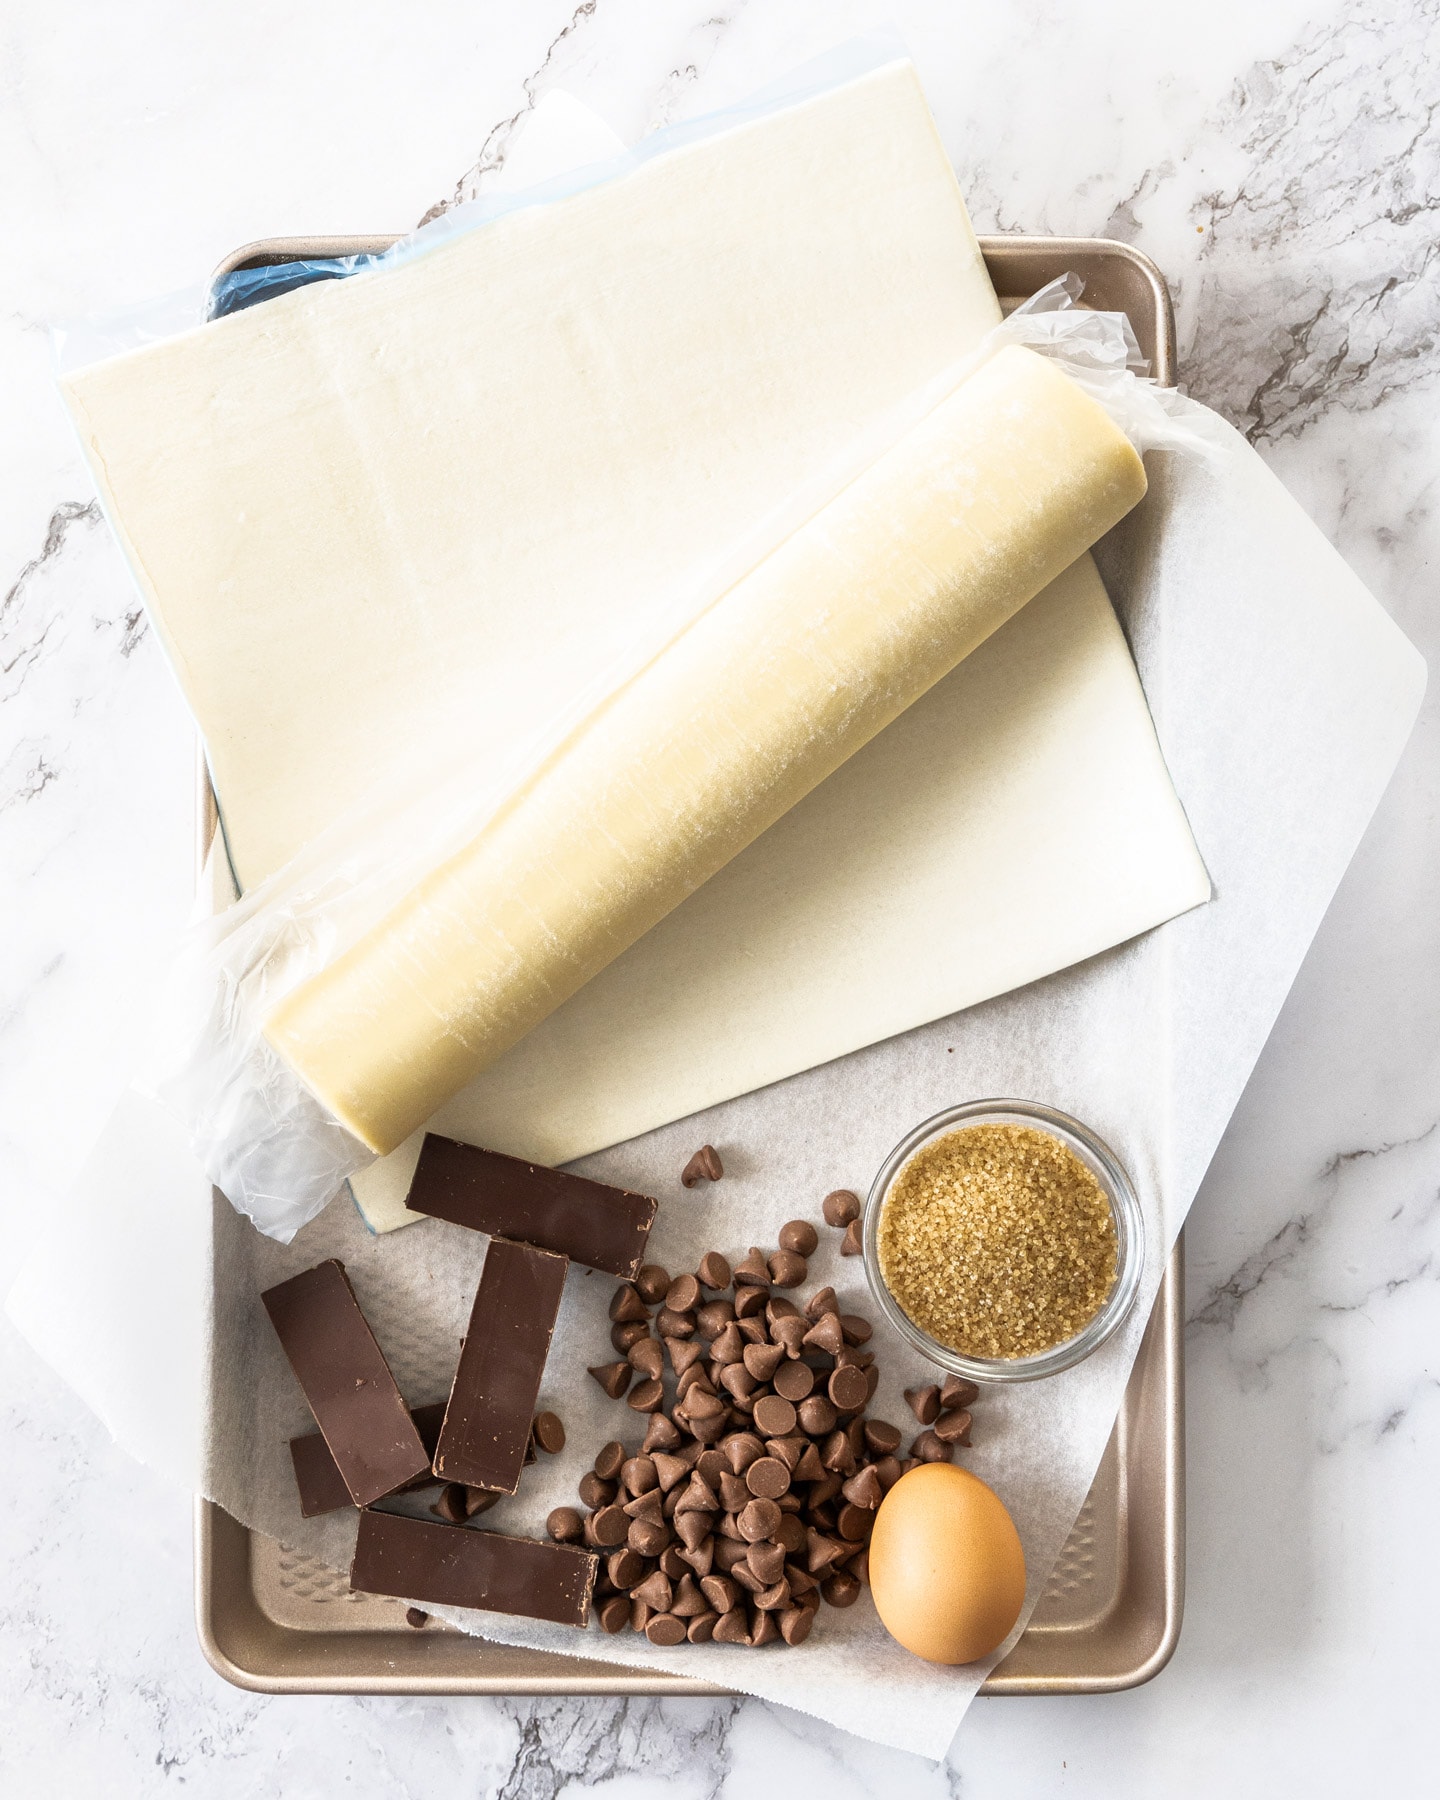 Ingredients for chocolate puff pastries on a baking tray.